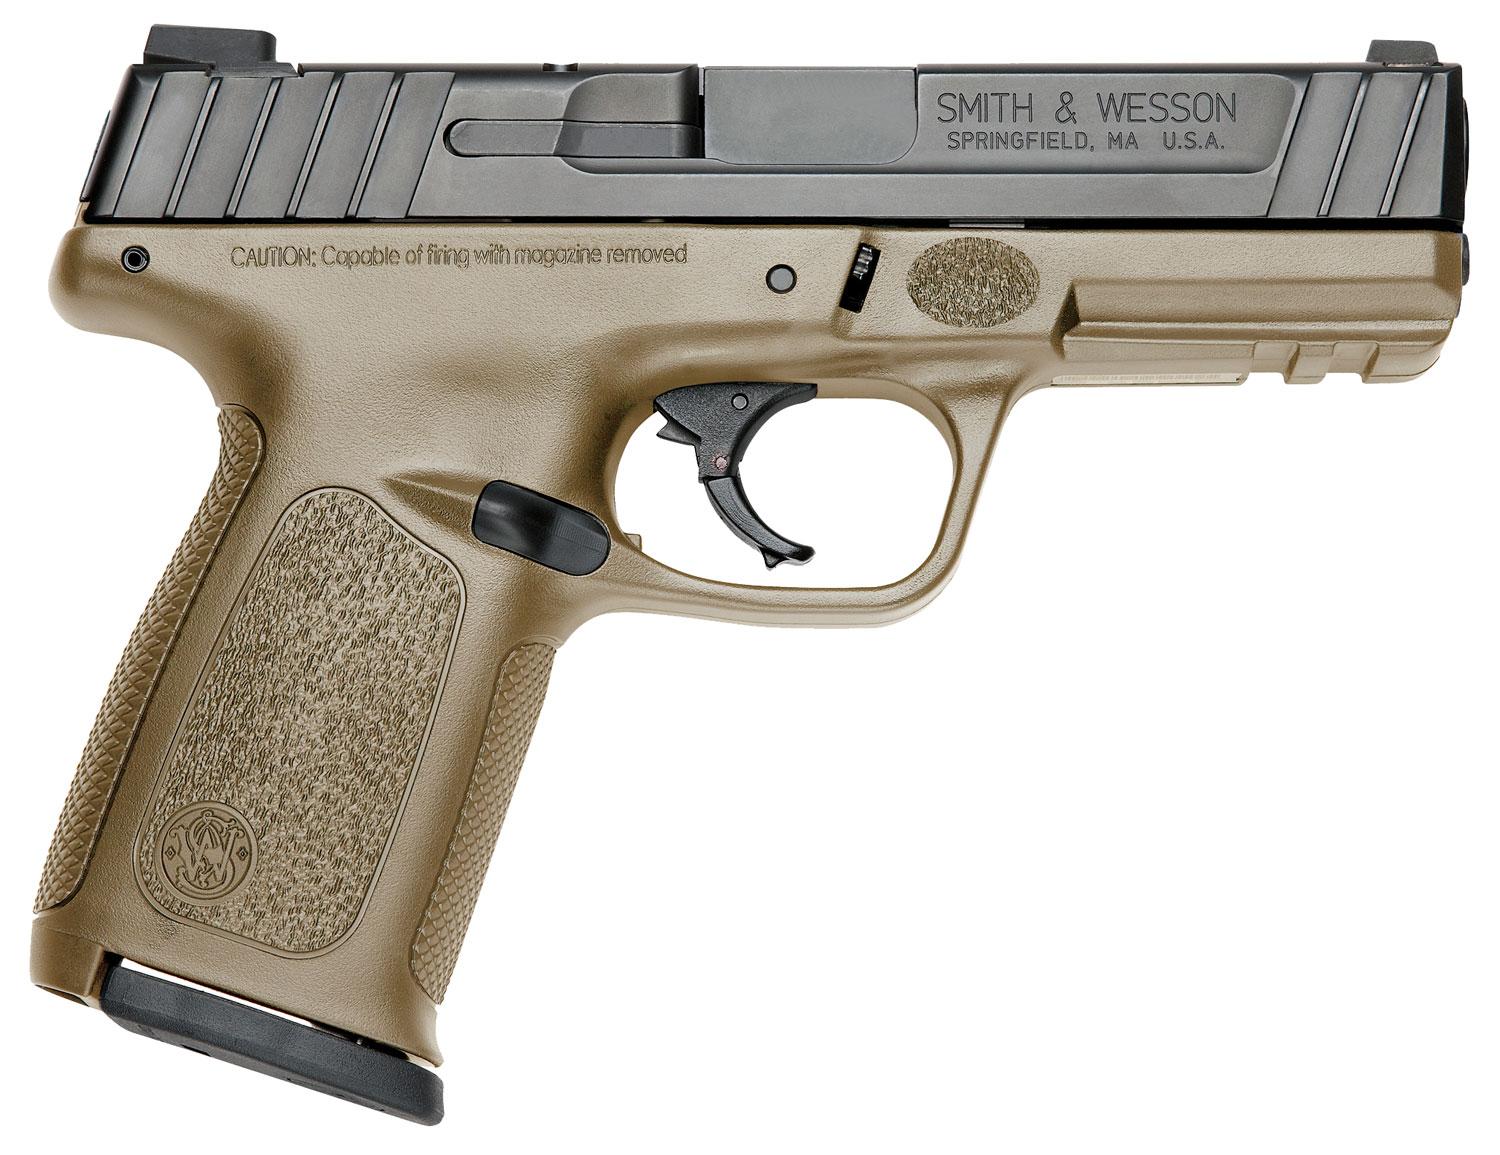 Smith and Wesson SD40 Pistol 11999, 40 S&W, 4", FDE Polymer Grips, FDE Finish, 14 Rds